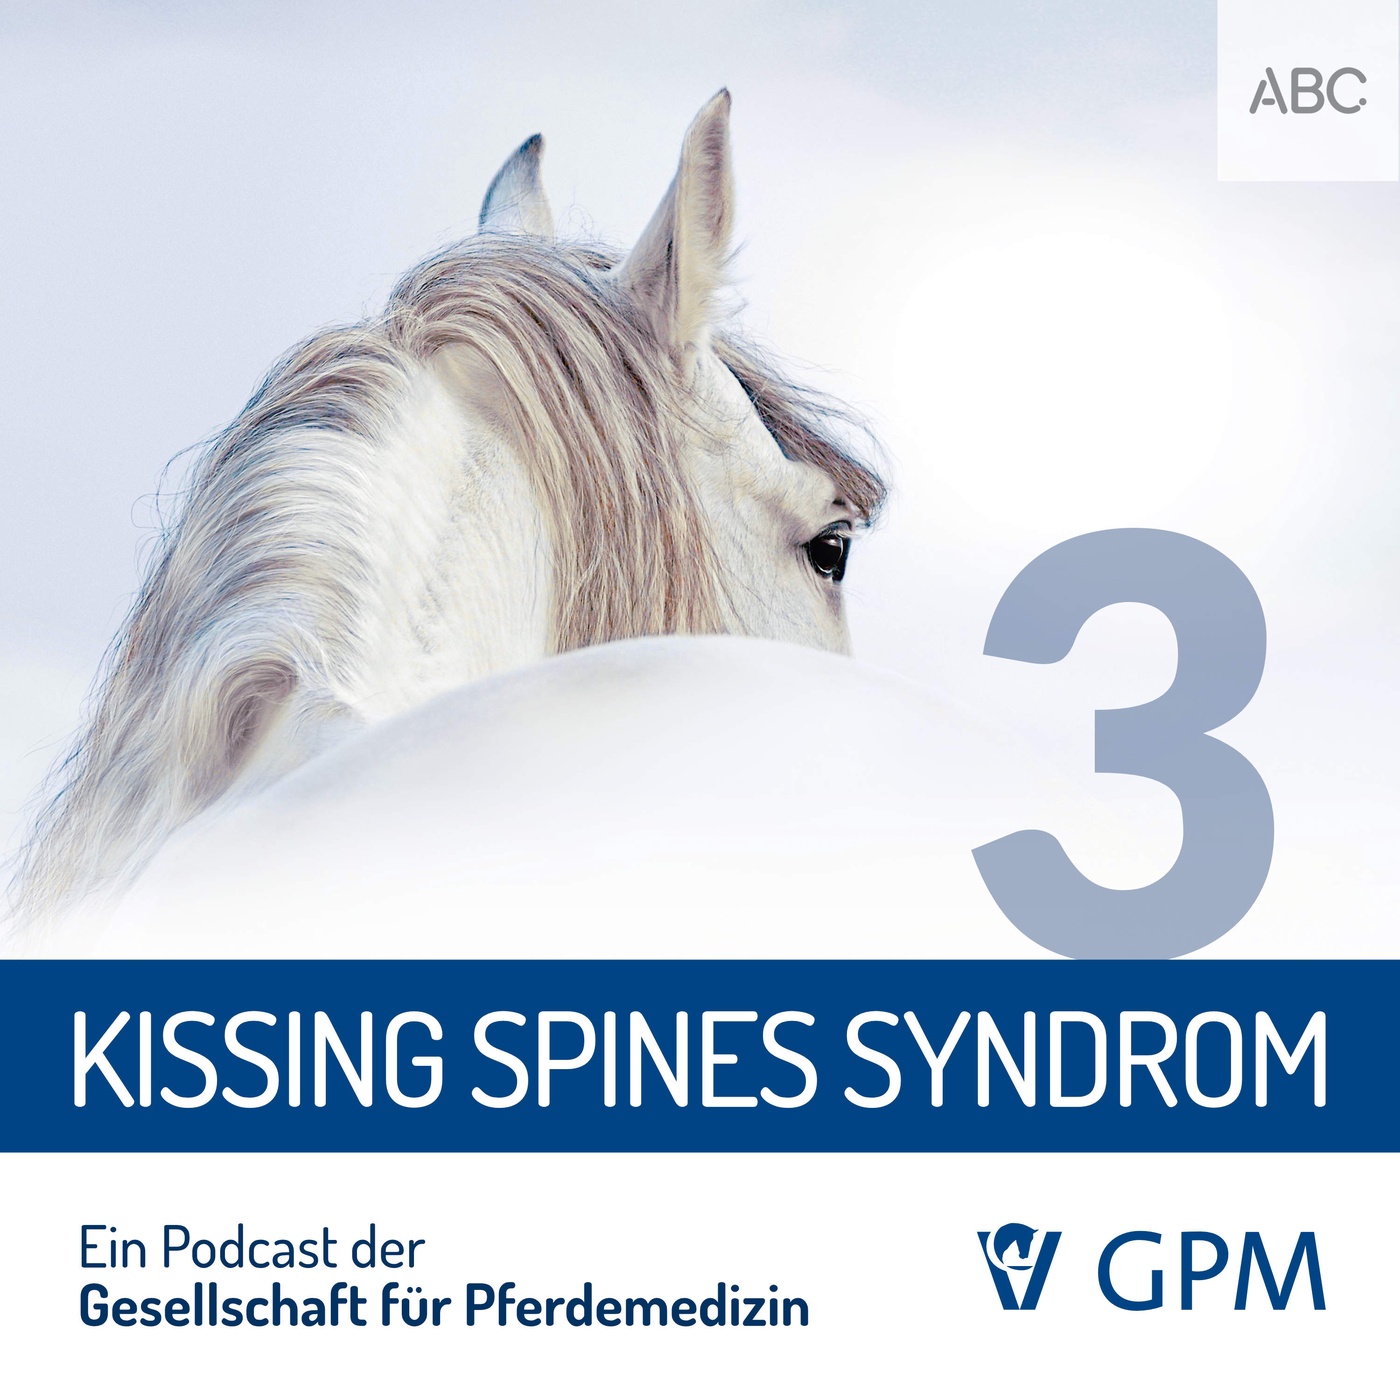 Kissing Spines Syndrom